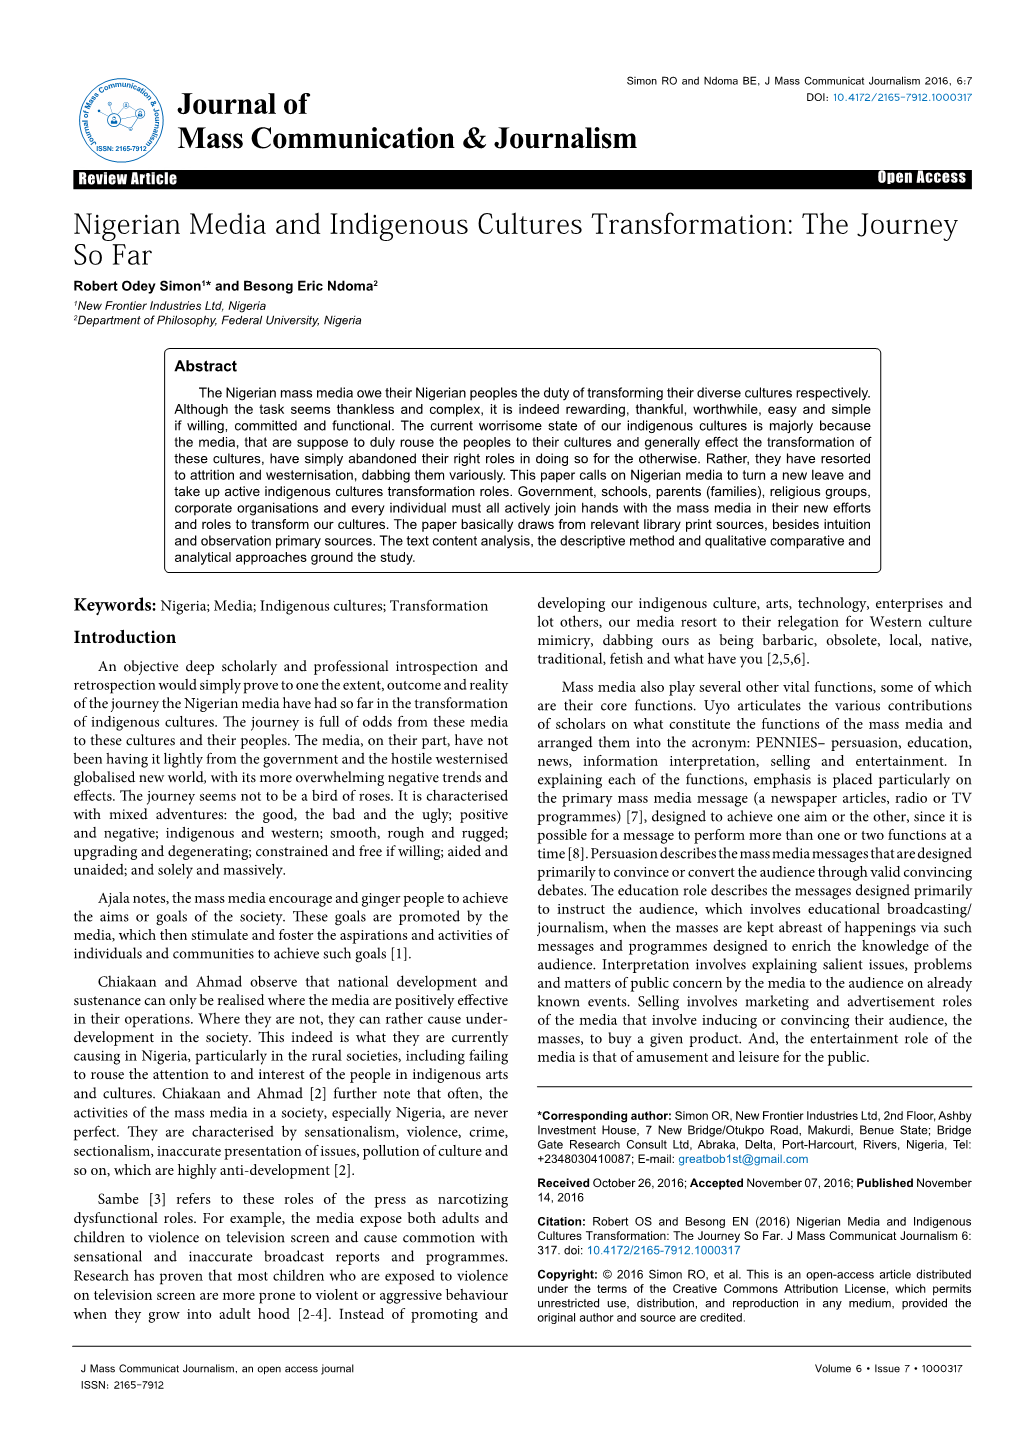 Nigerian Media and Indigenous Cultures Transformation